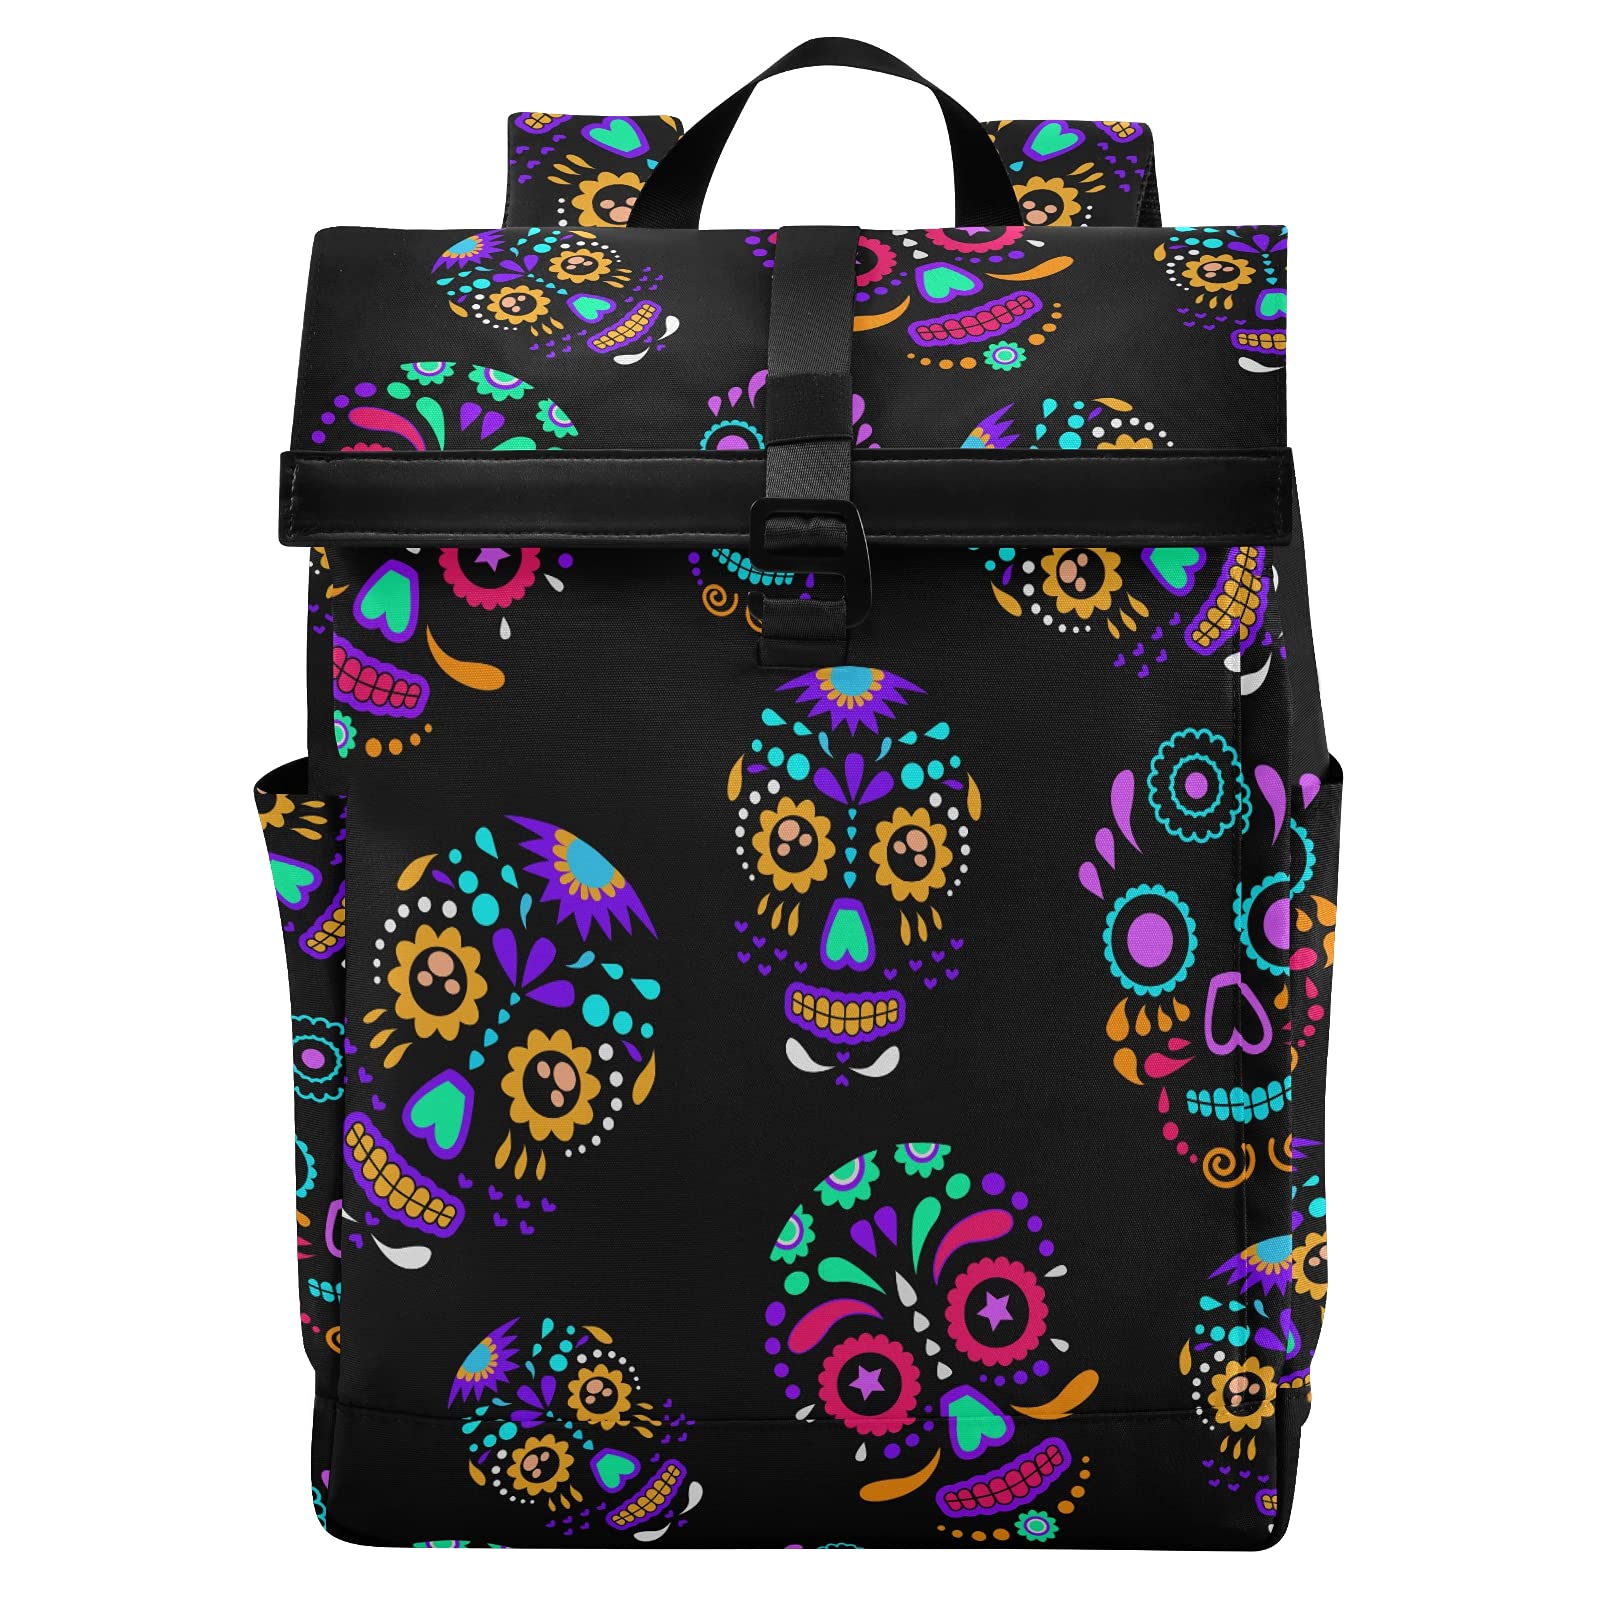 ALAZA Day Of The Dead Colorful Sugar Skull Floral Large Laptop Backpack Purse for Women Men Waterproof Anti Theft Roll Top Backpack, 13-17.3 inch